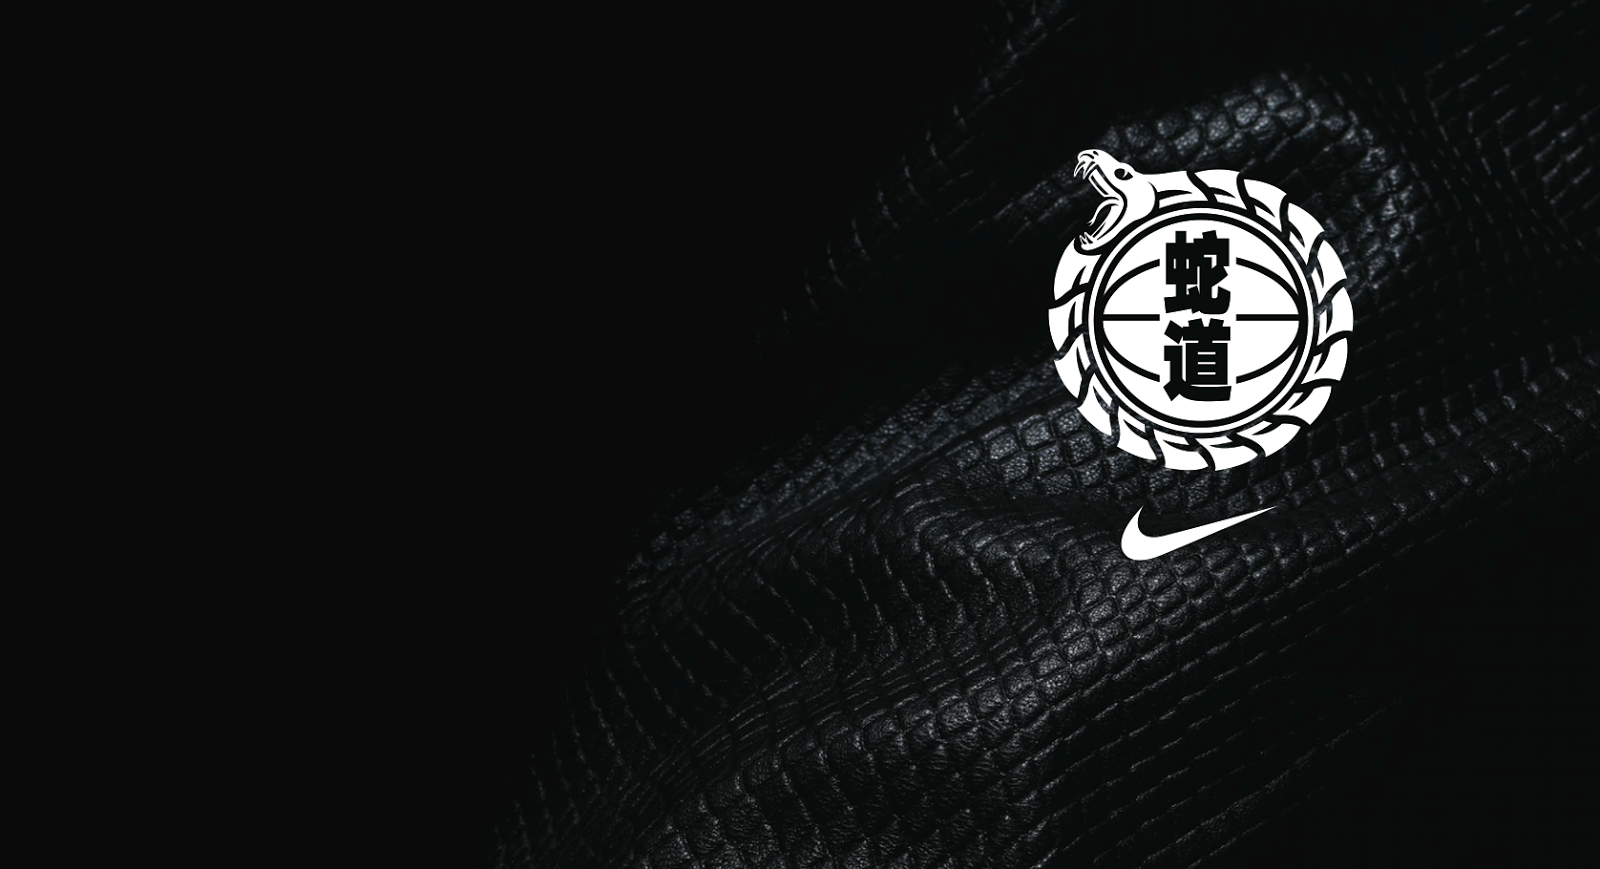 nike year of the snake